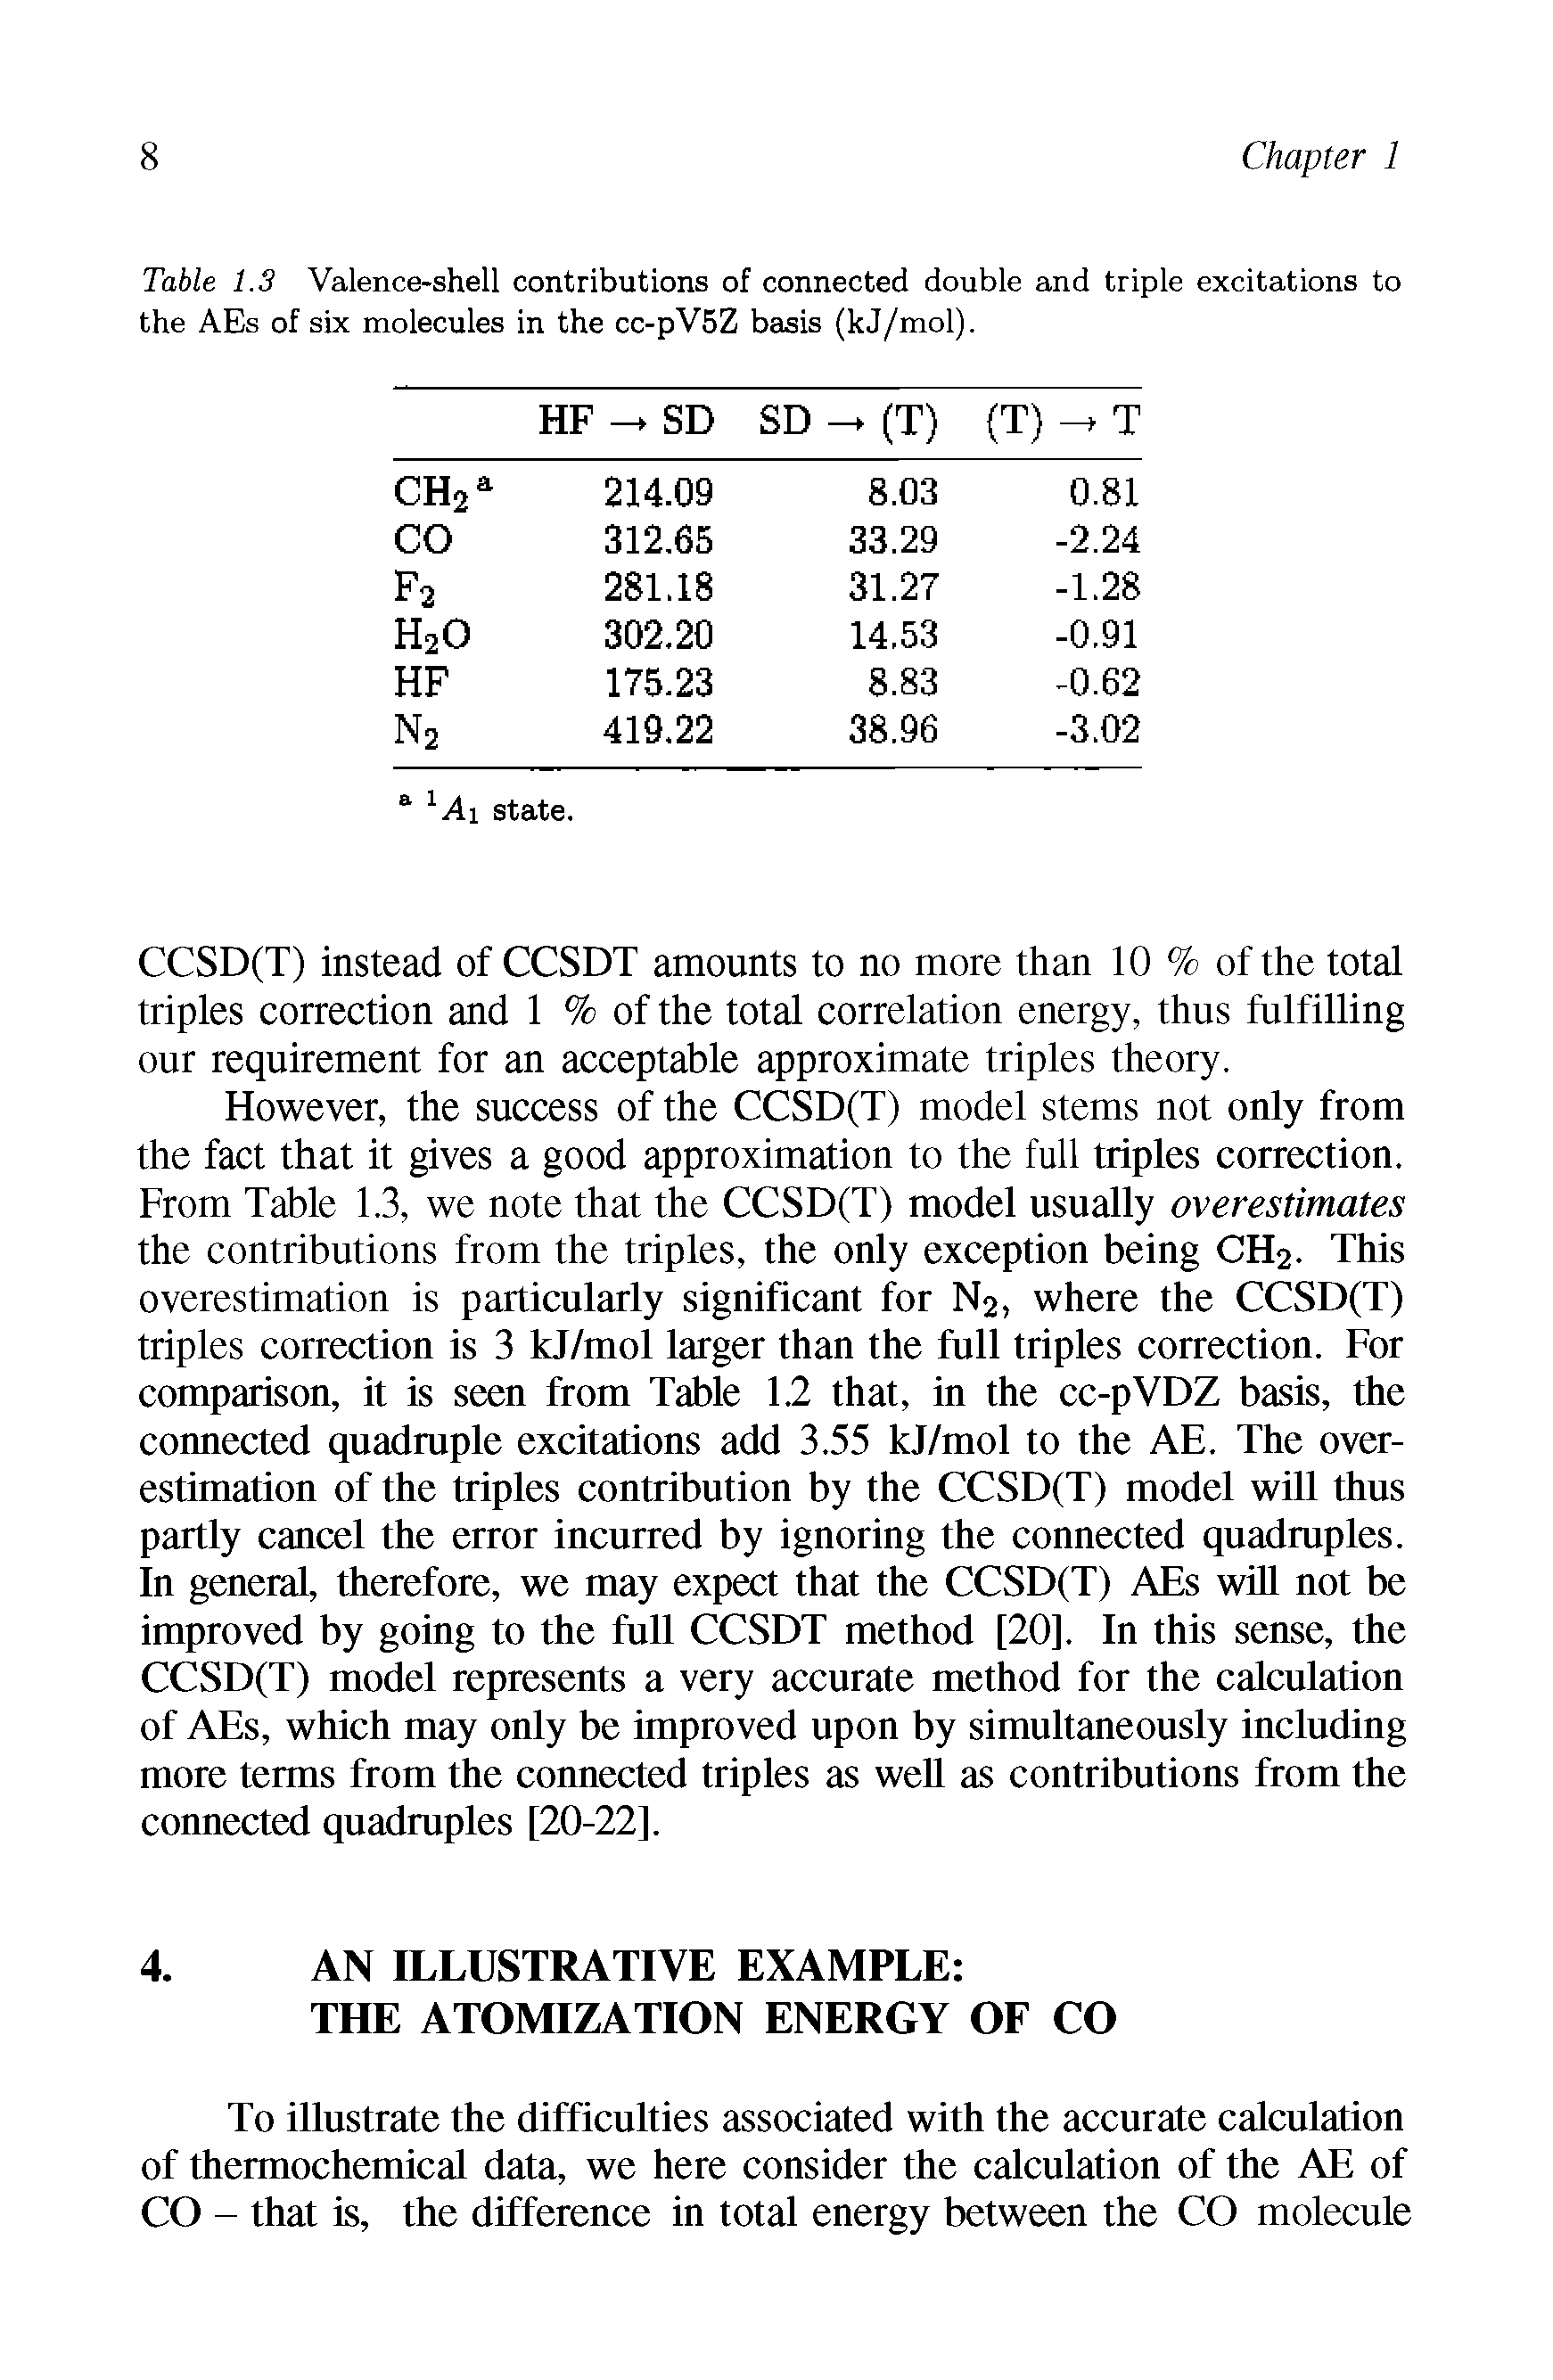 Table 1.3 Valence-shell contributions of connected double and triple excitations to the AEs of six molecules in the cc-pV5Z basis (kJ/mol).